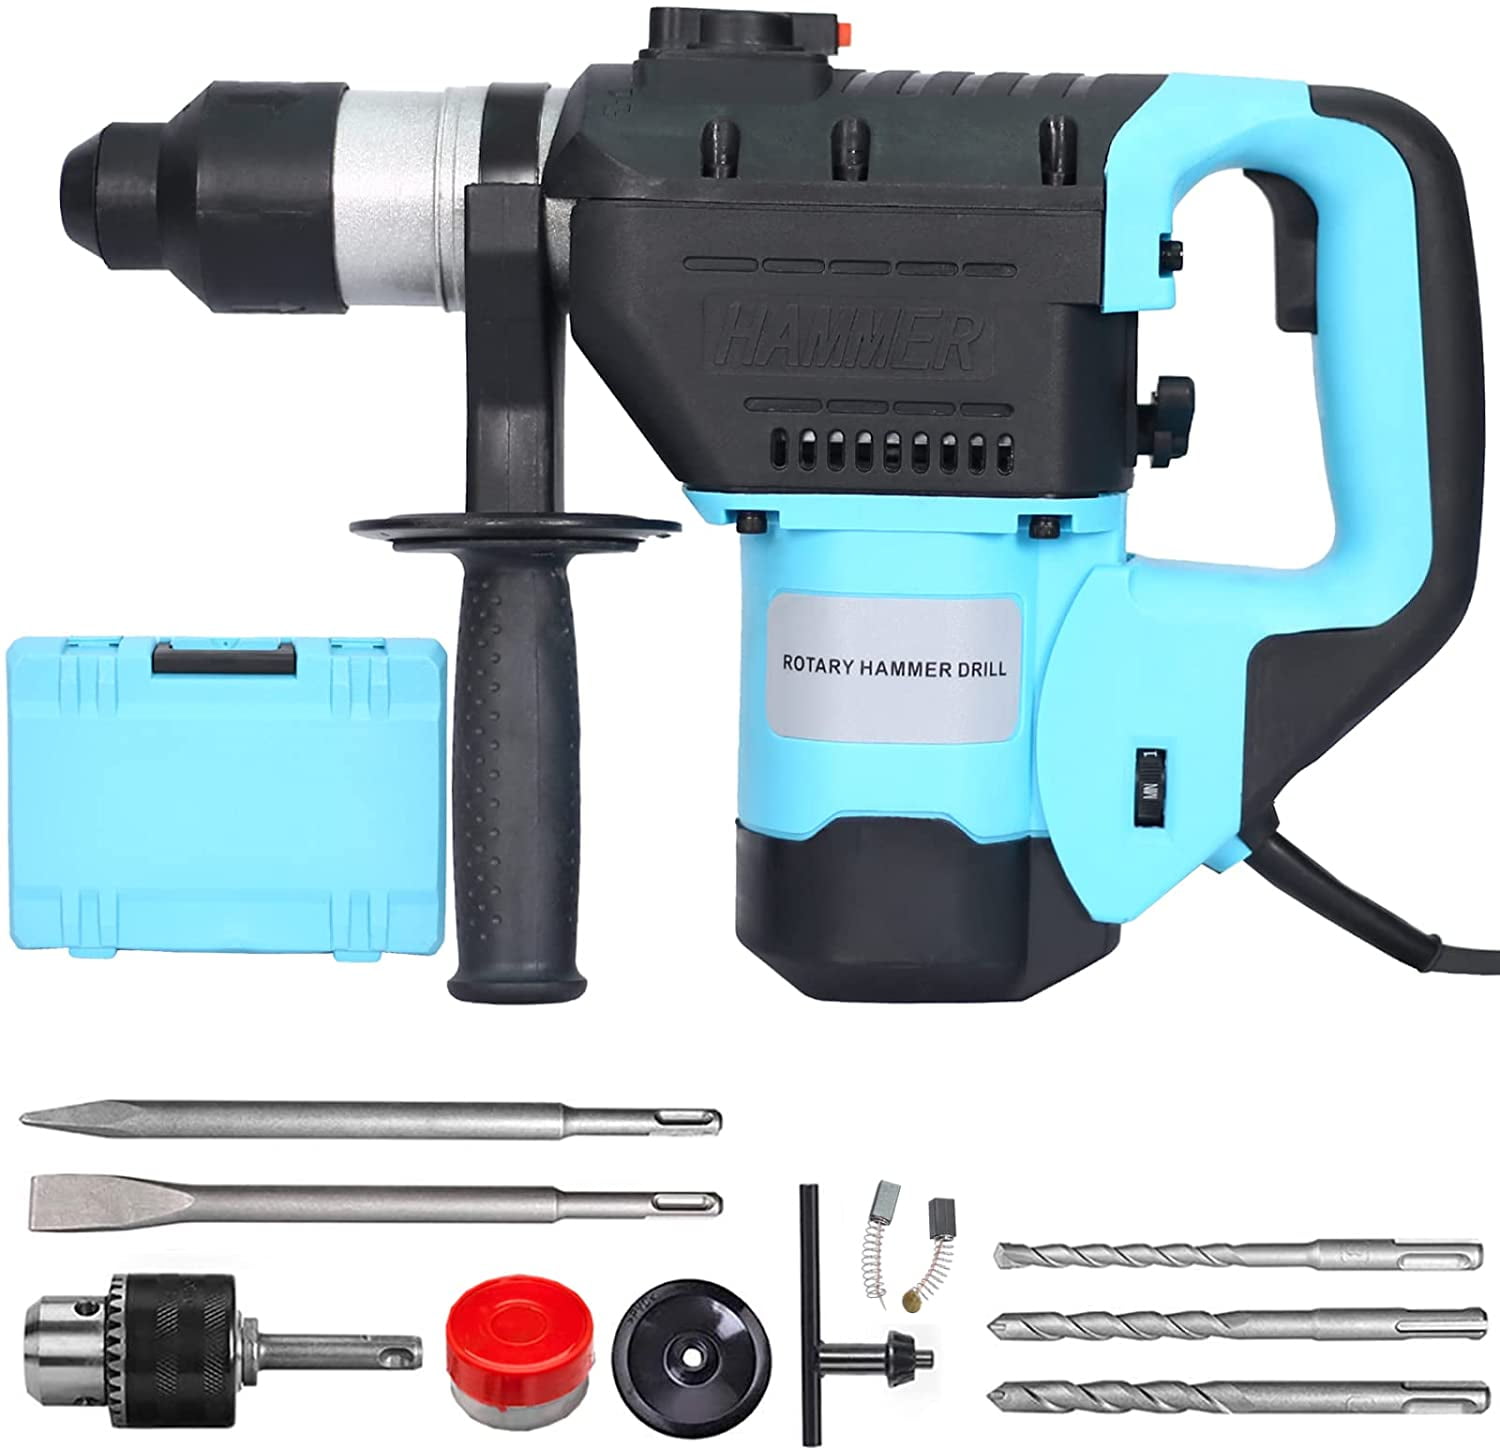 800W Heavy Duty Electric Rotary Hammer Drill Come With SDS Plus Bit Chisel Tool 